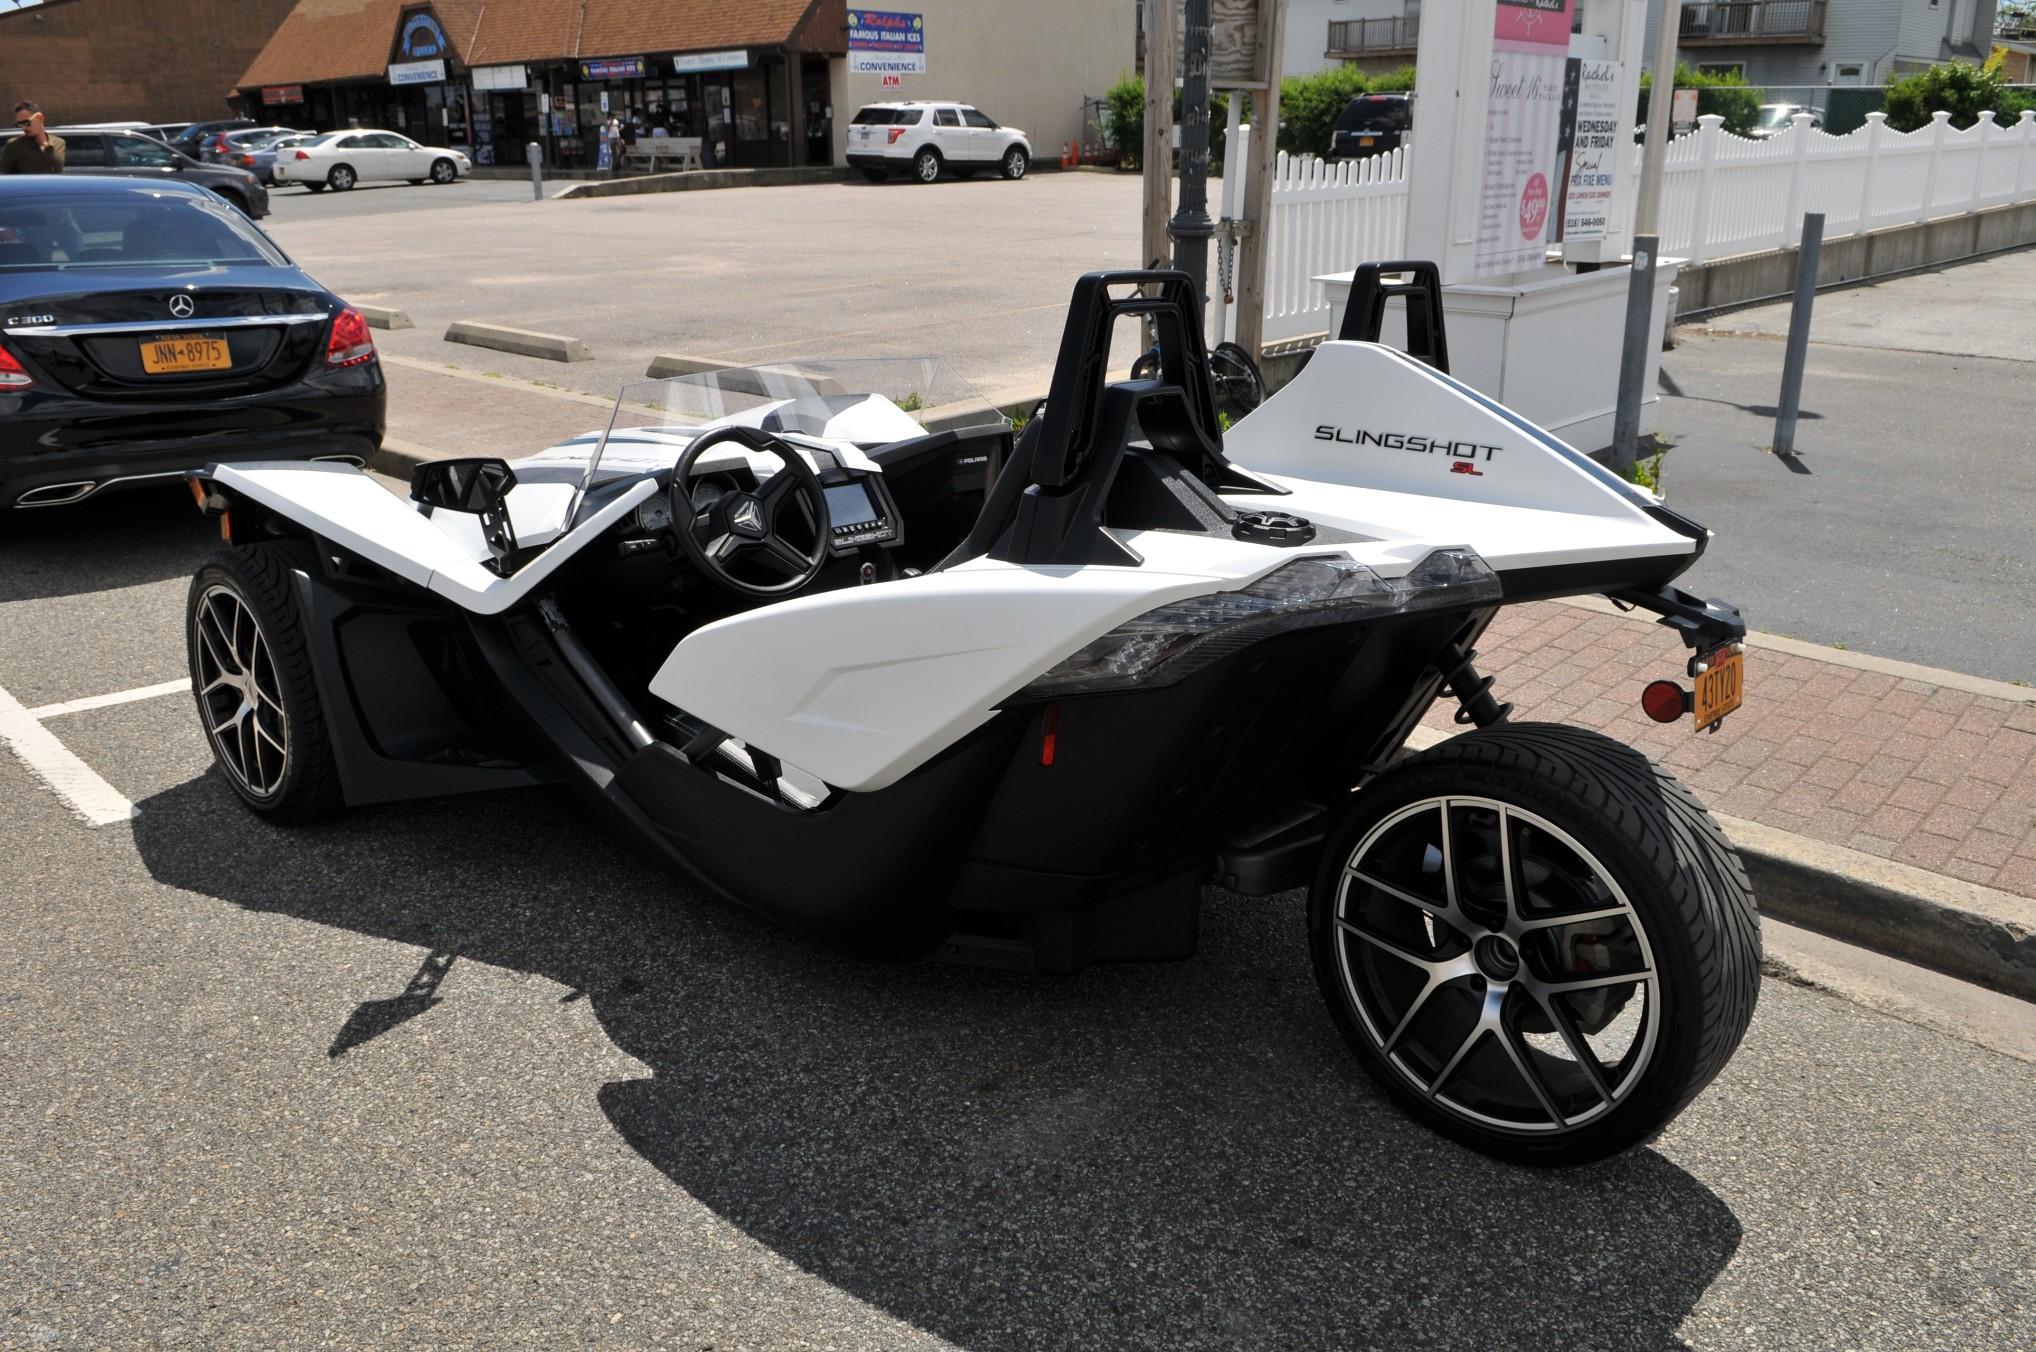 A Polaris Slingshot was spotted with “Batman” regalia in Calgary, Canada.